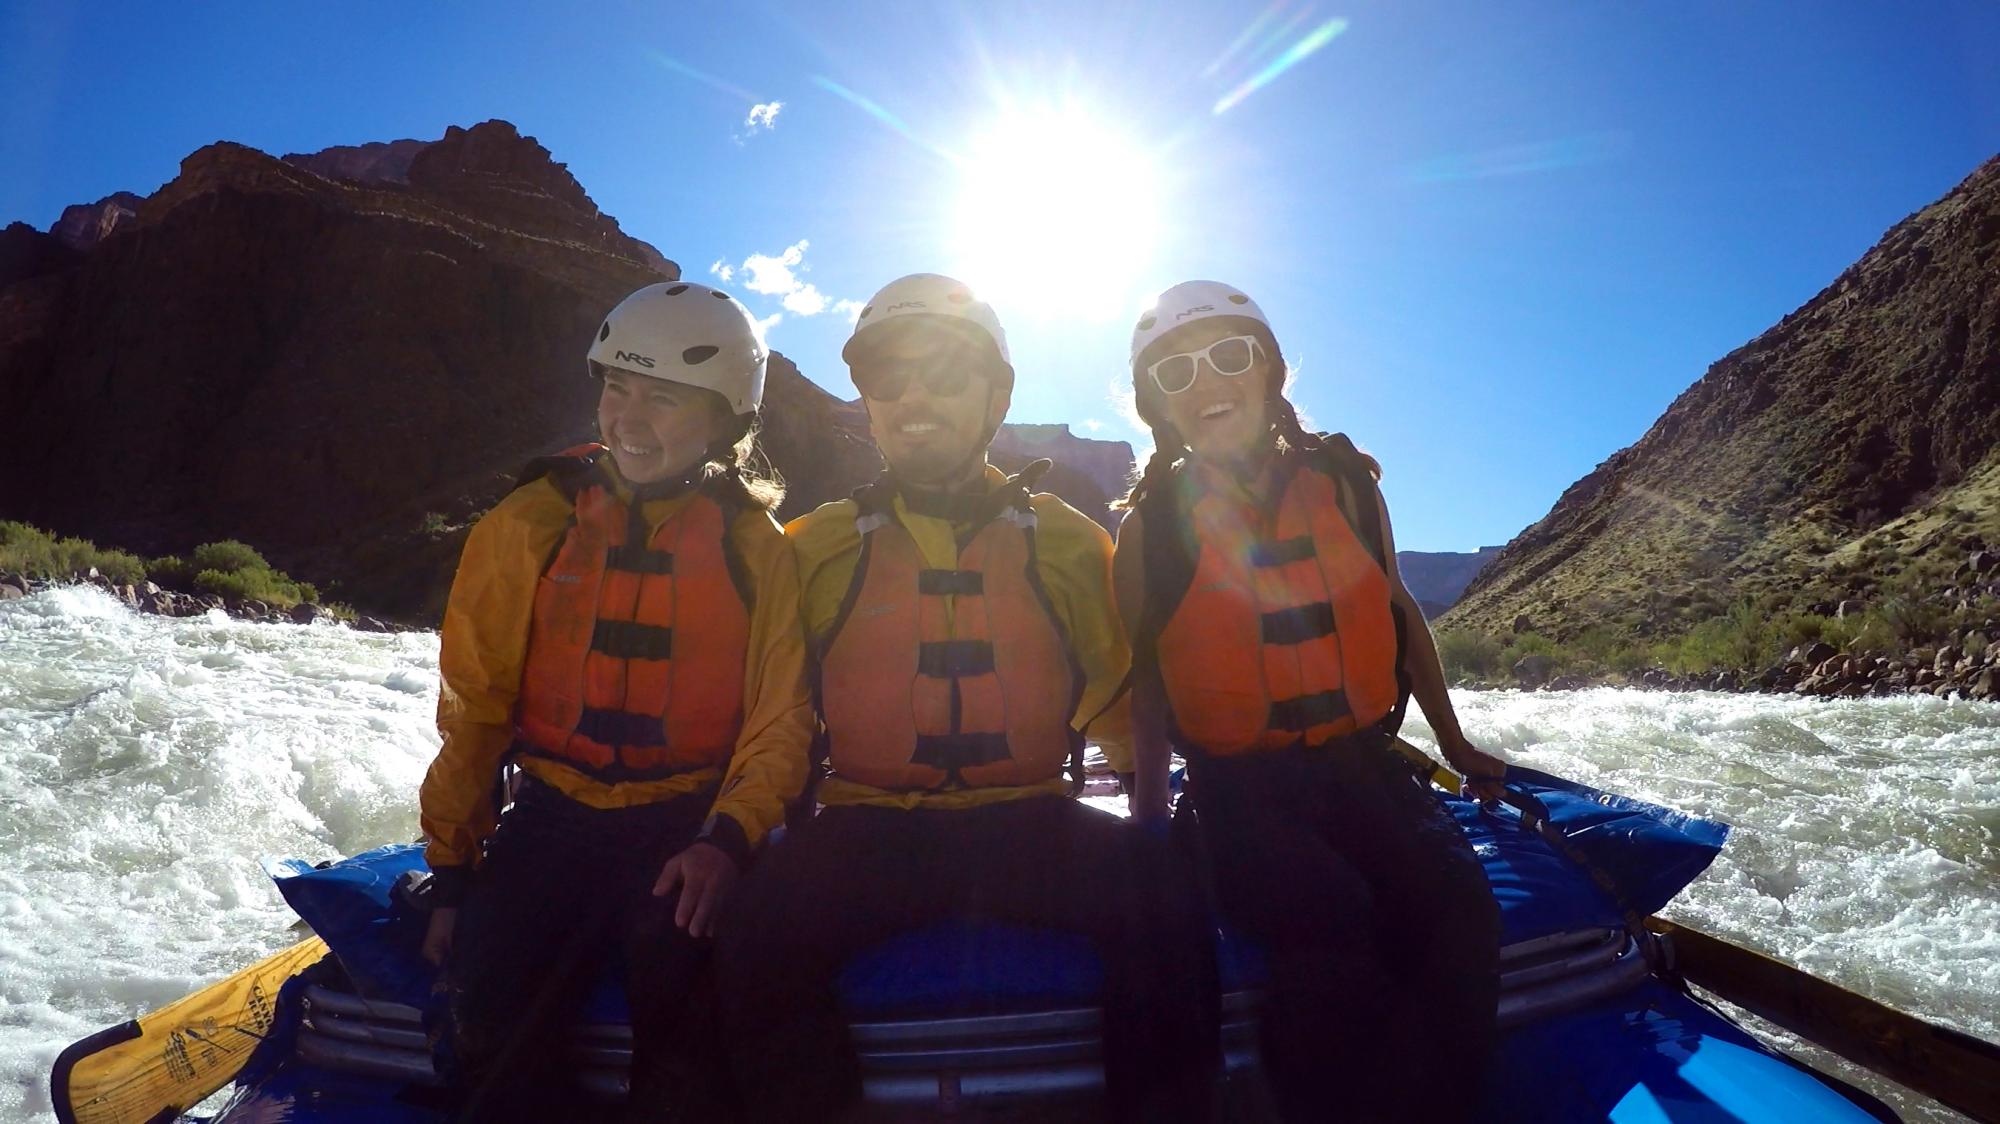 Two women and a man whitewater raft